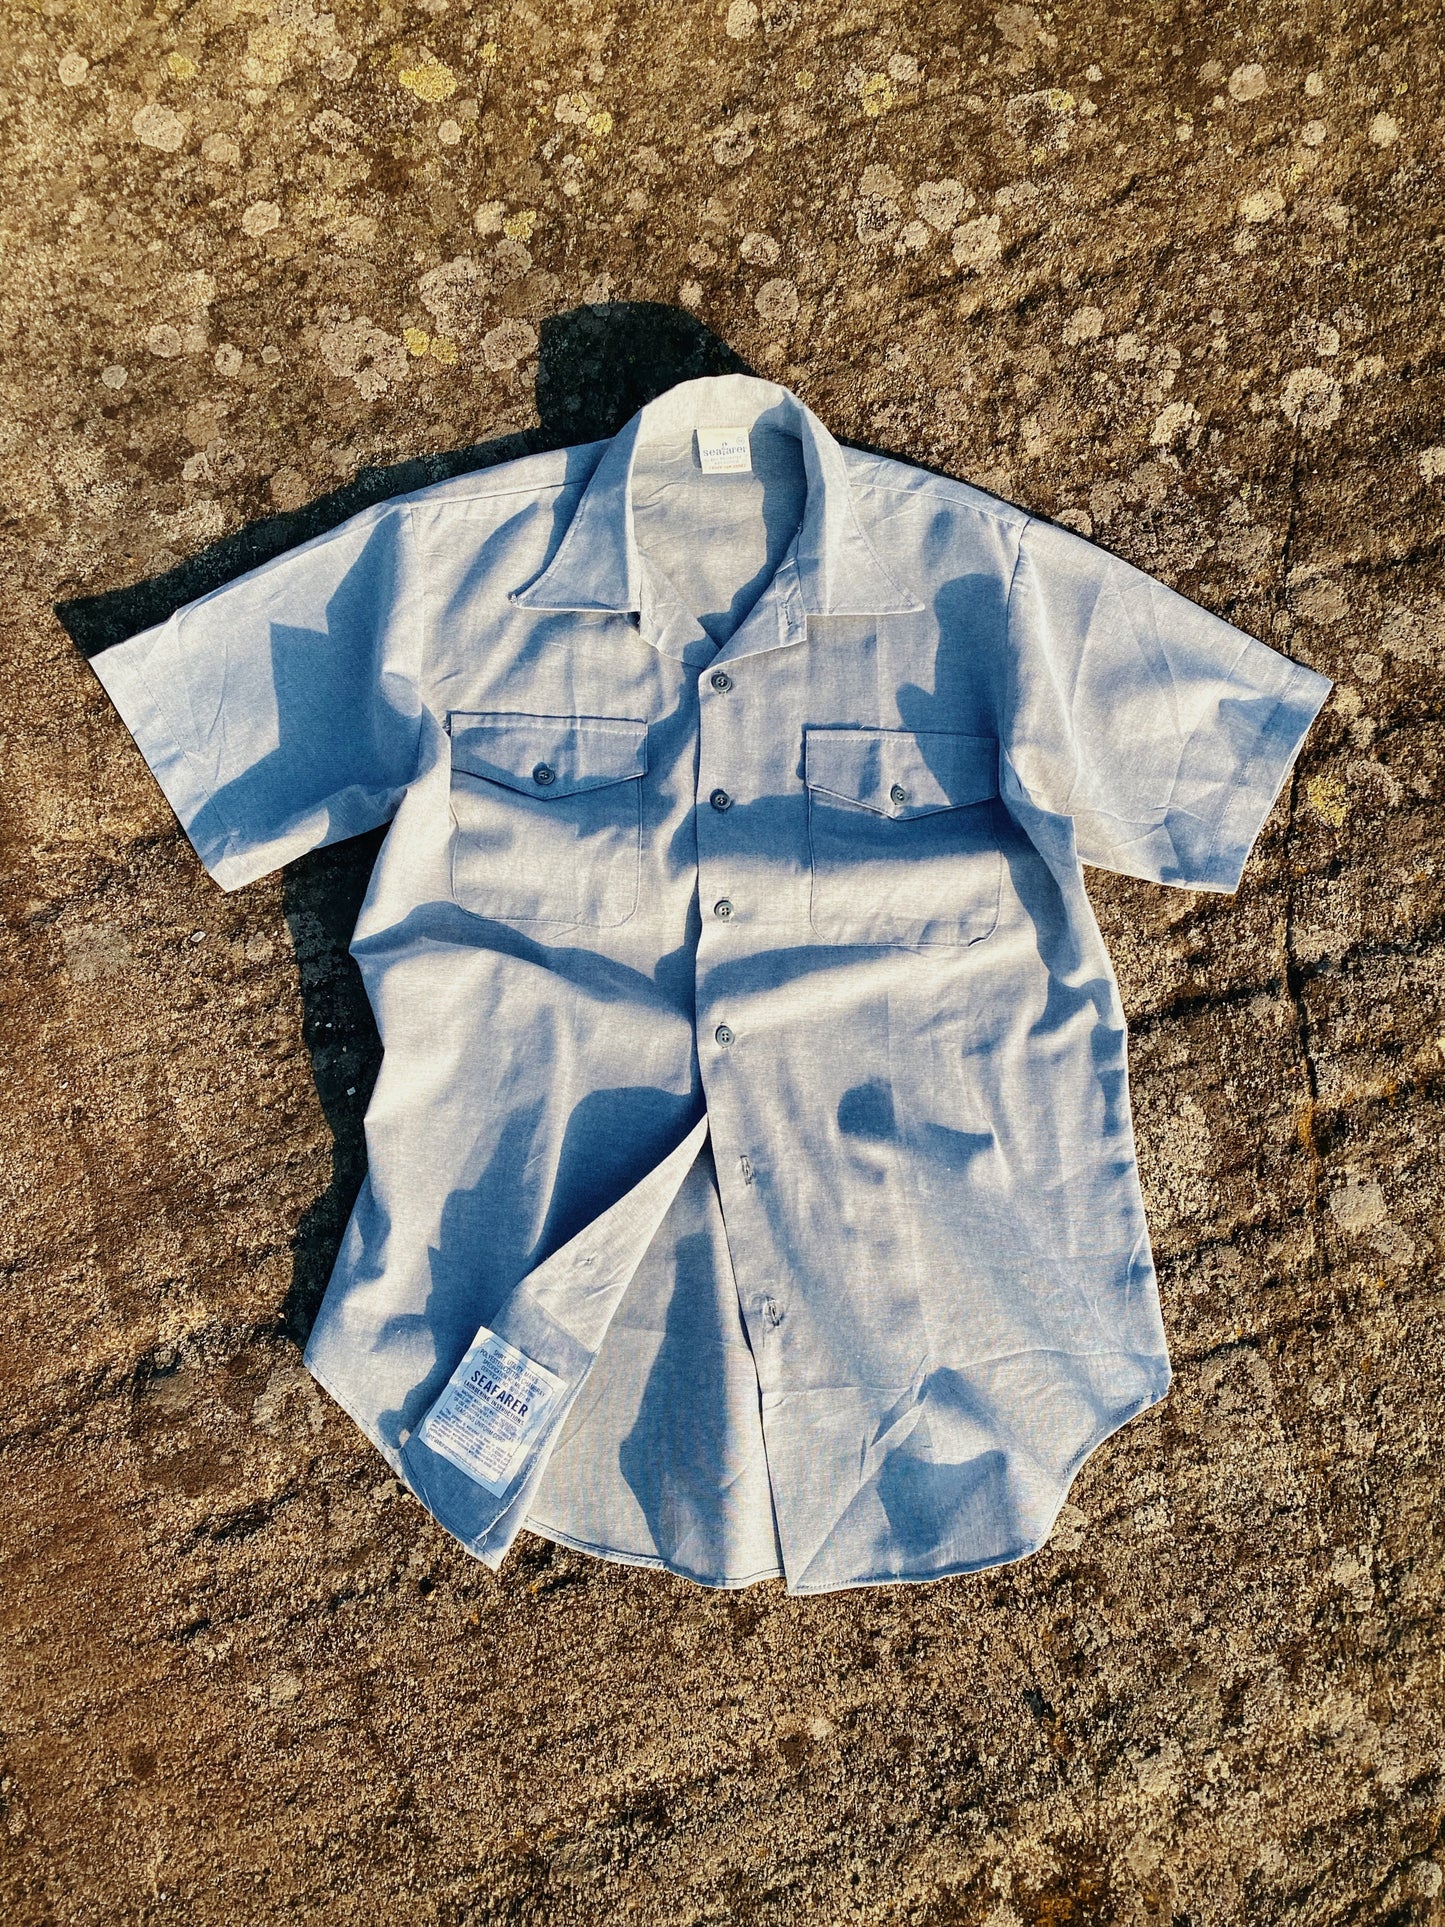 Vintage Deadstock US Made S-S Chambray Shirts